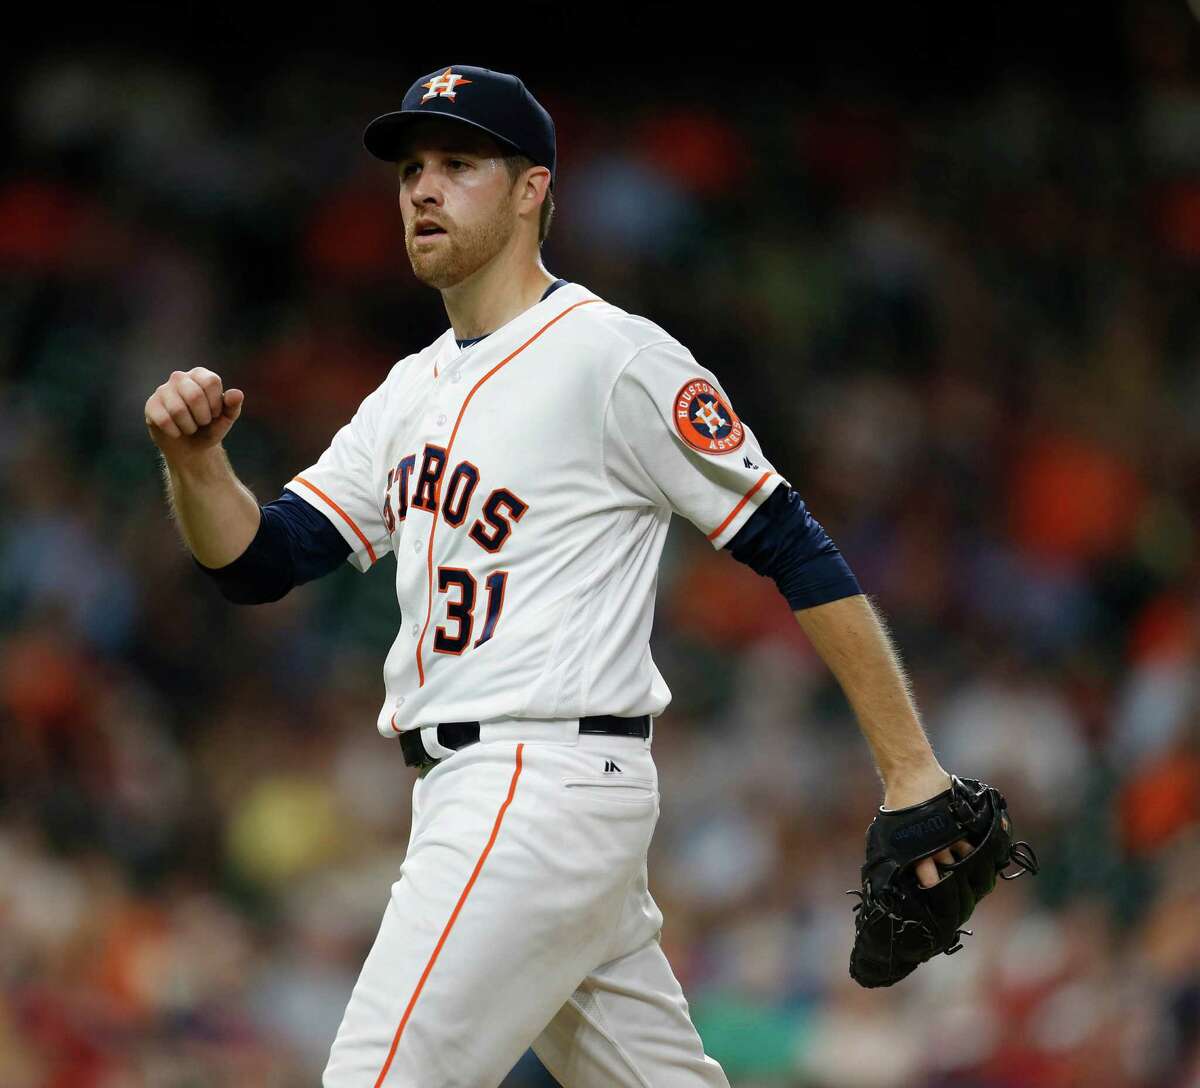 Astros starter Collin McHugh tossed seven strong innings but didn't receive a decision.